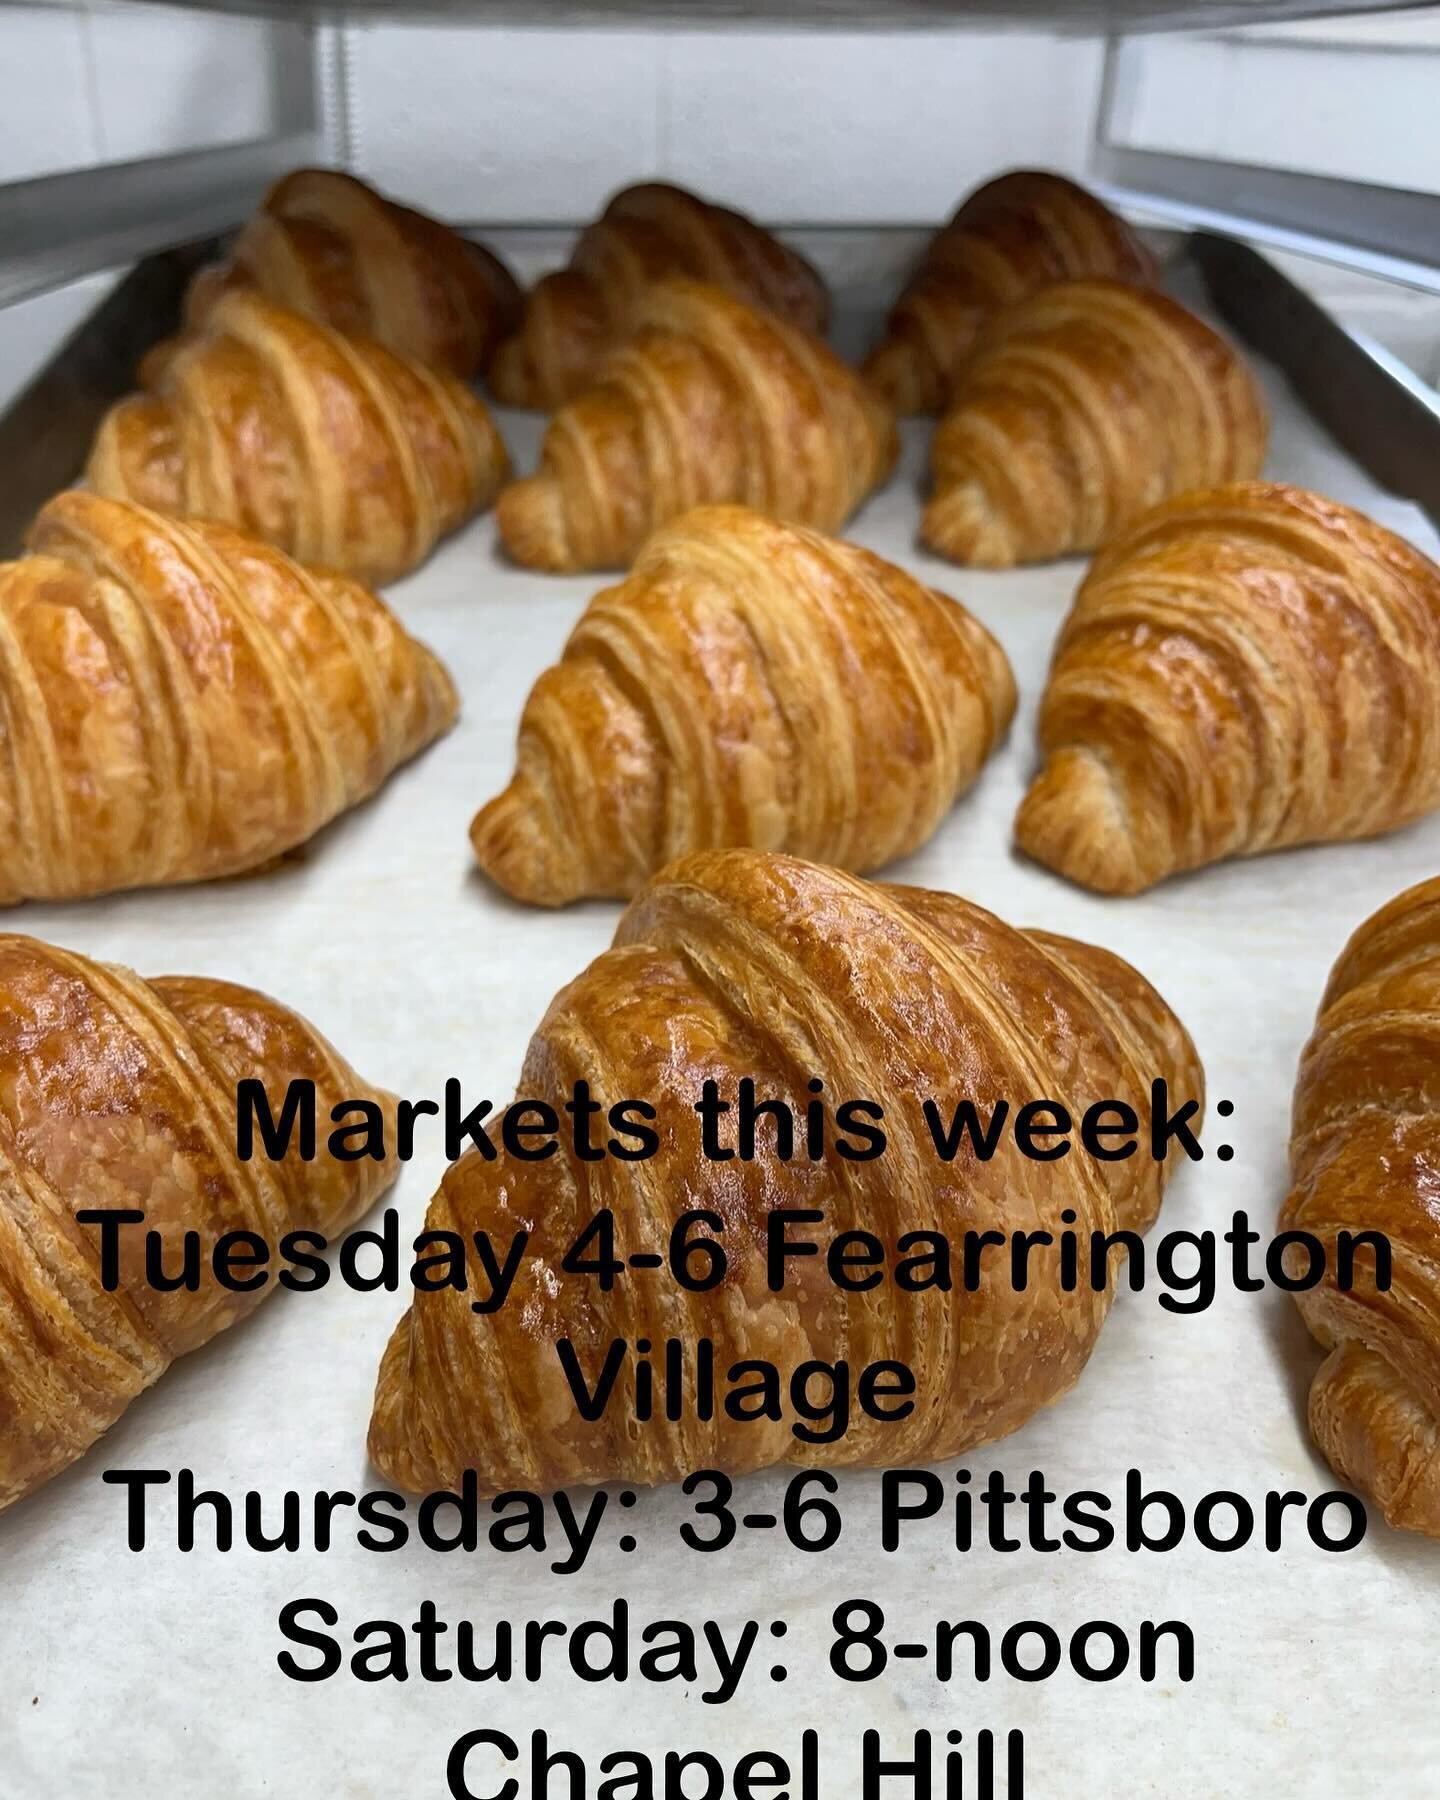 Looking forward to another sweet week? Well, we are here to make it sweeter, and a little sour (sourdough that is!)! Come find us at any of our markets:
@fearringtonfarmersmarket Tuesday from 4-6
@thepittsborofarmersmarket Thursday from 3-6
@chfarmer